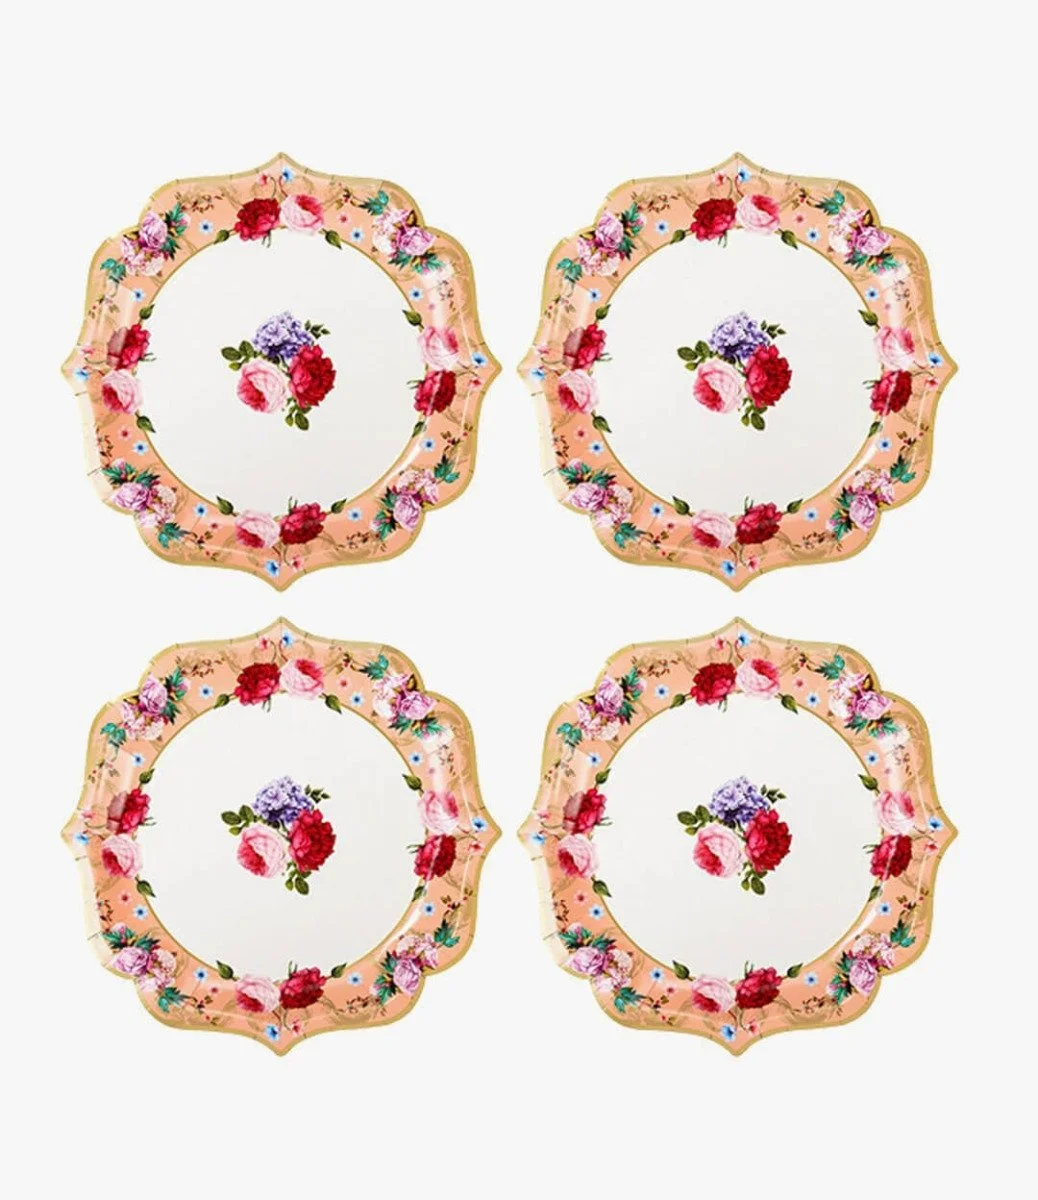 Truly Scrumptious Serving Platter 4pc Pack by Talking Tables